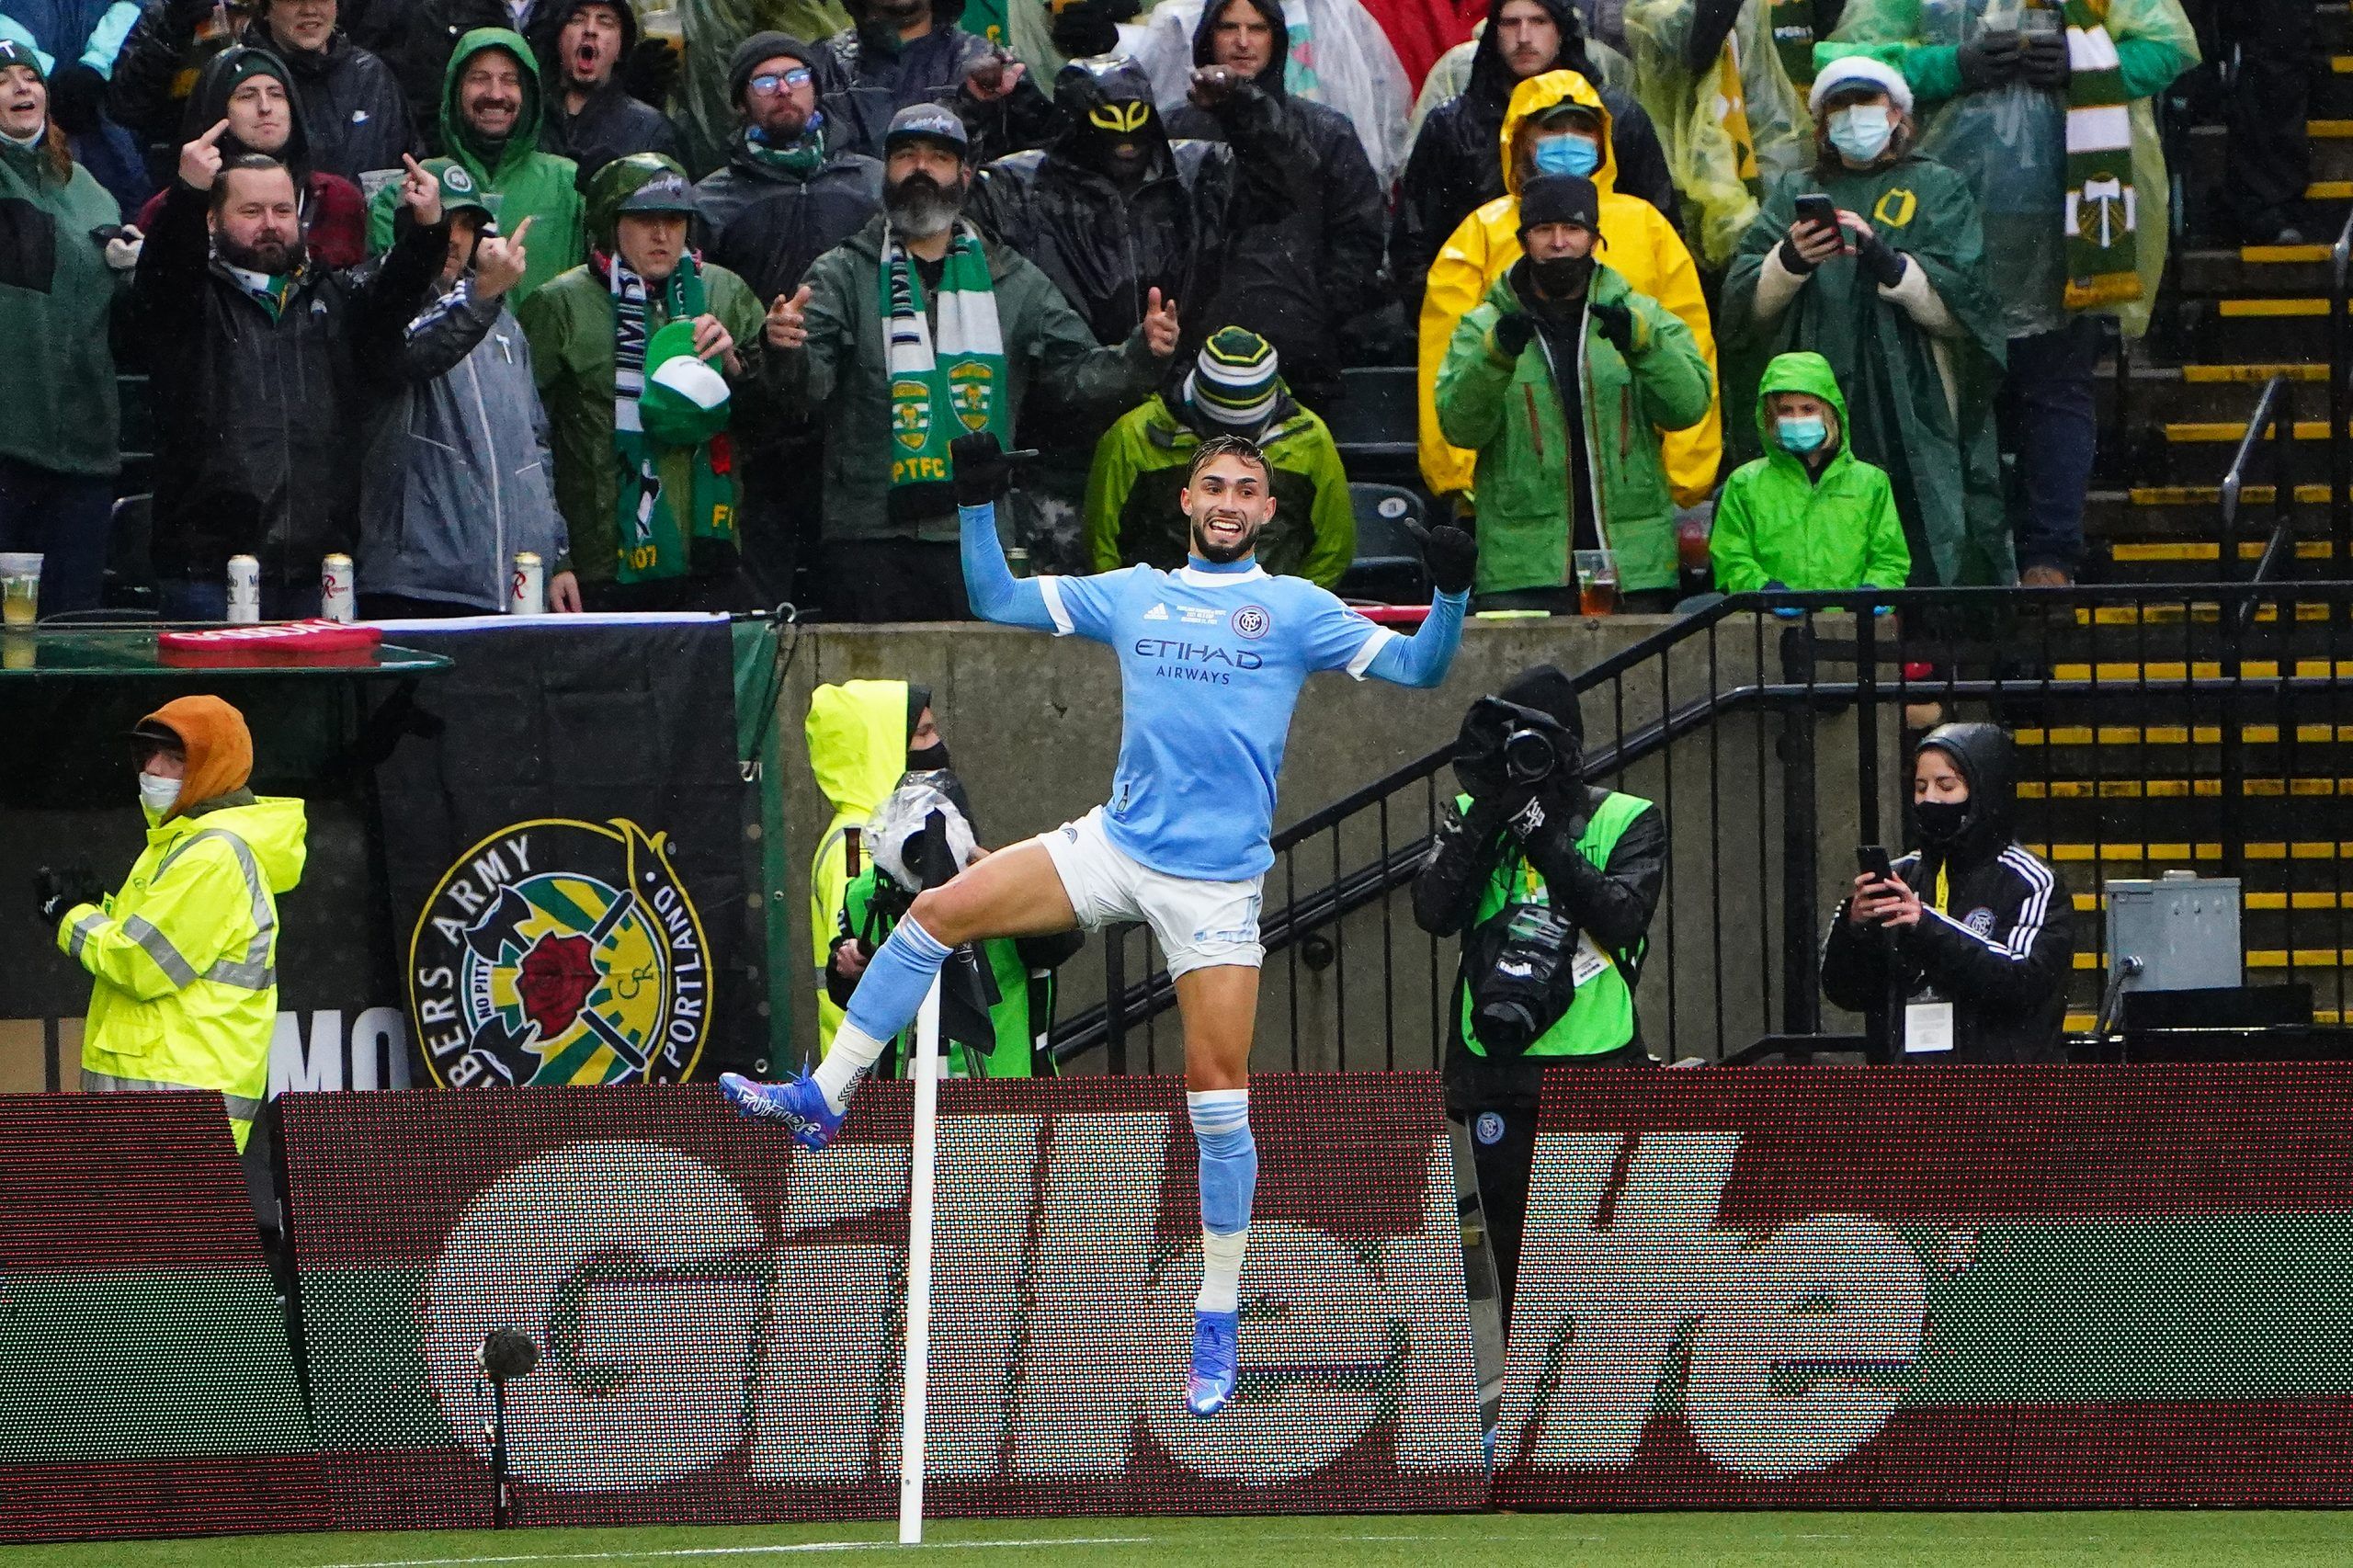 Dec 11, 2021; Portland, OR, USA;New York City FC midfielder Valentin Castellanos (11) celebrates after scoring a goal against the Portland Timbers during the first half of the 2021 MLS Cup championship game at Providence Park. Mandatory Credit: John David Mercer-USA TODAY Sports